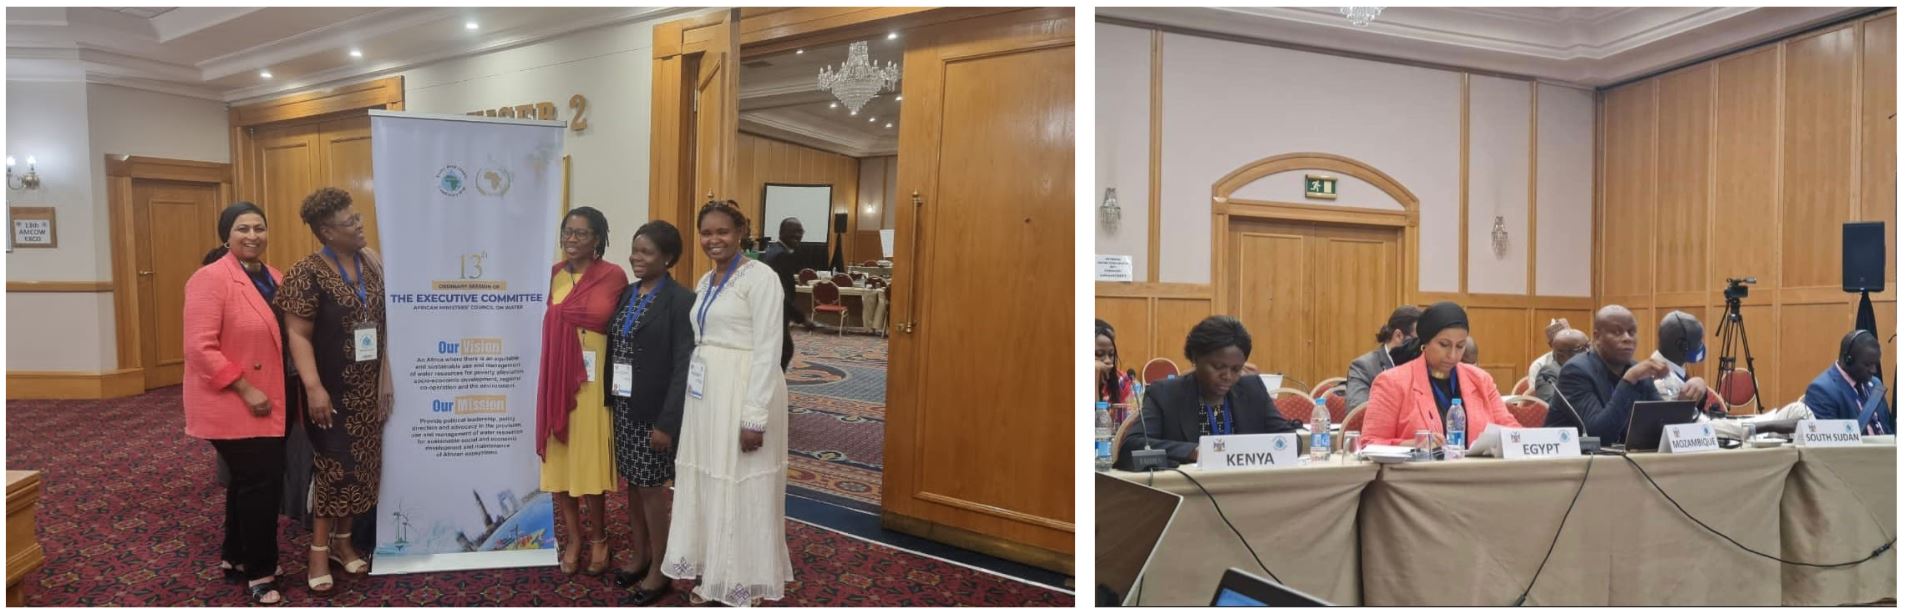 Dr Adanech Yared, Bogadi Mathangwane, Gladys Wekesa, Maria Amakali and Dr. Tahani Sileet participated in the 13th Ordinary Session of the Executive Committee of African Ministers’ Council on Water - From 10 to 13 October 2022